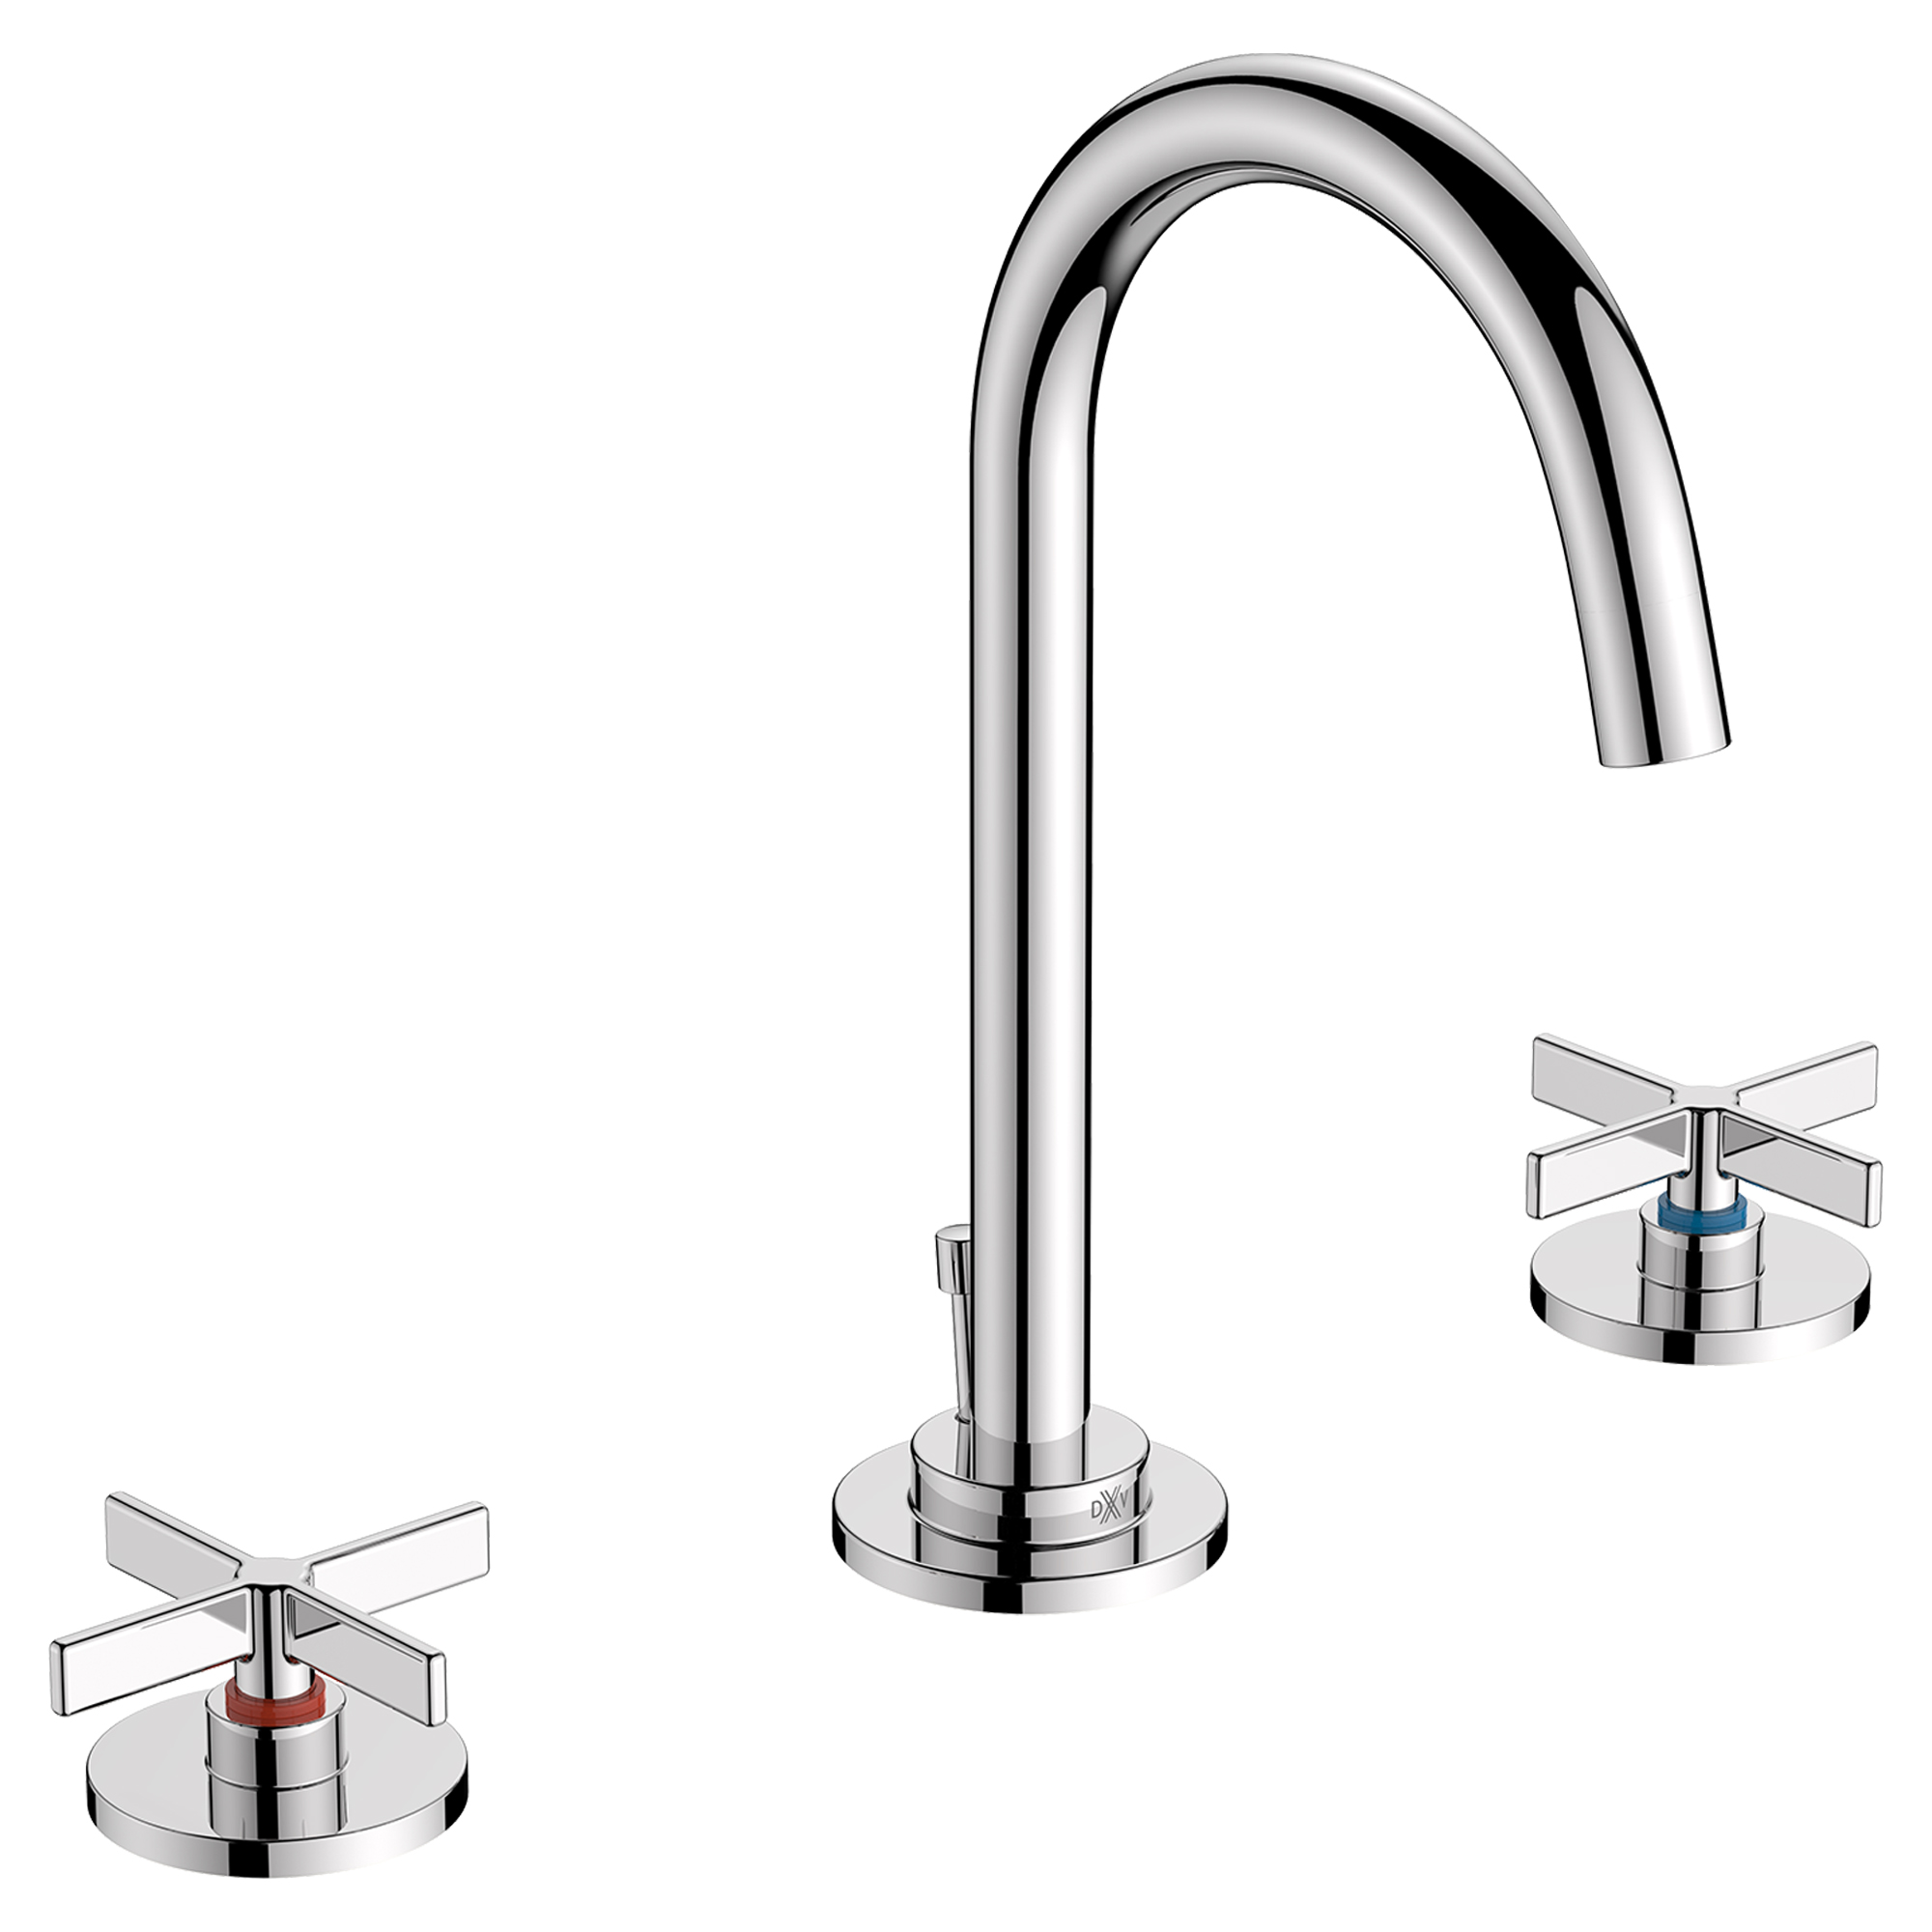 Percy 2-Handle Widespread Bathroom Faucet with Indicator Markings and Cross Handles